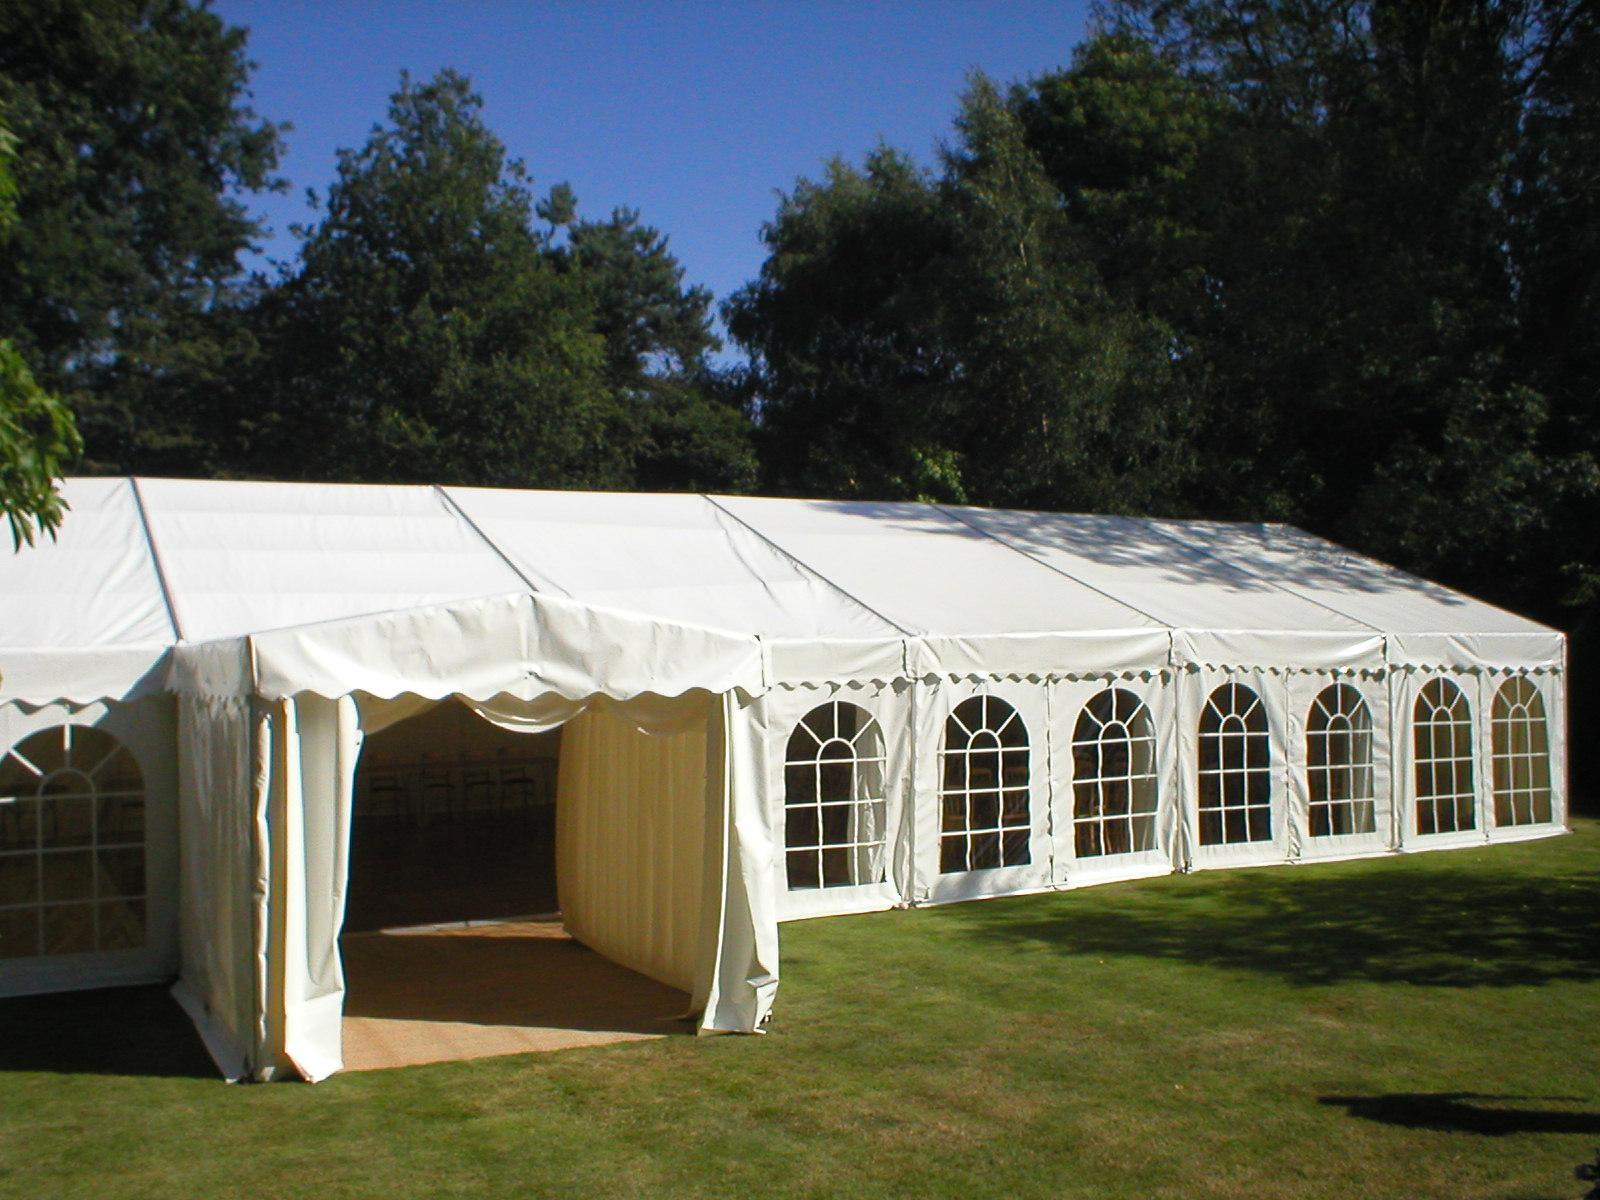 Marquee tents are often used